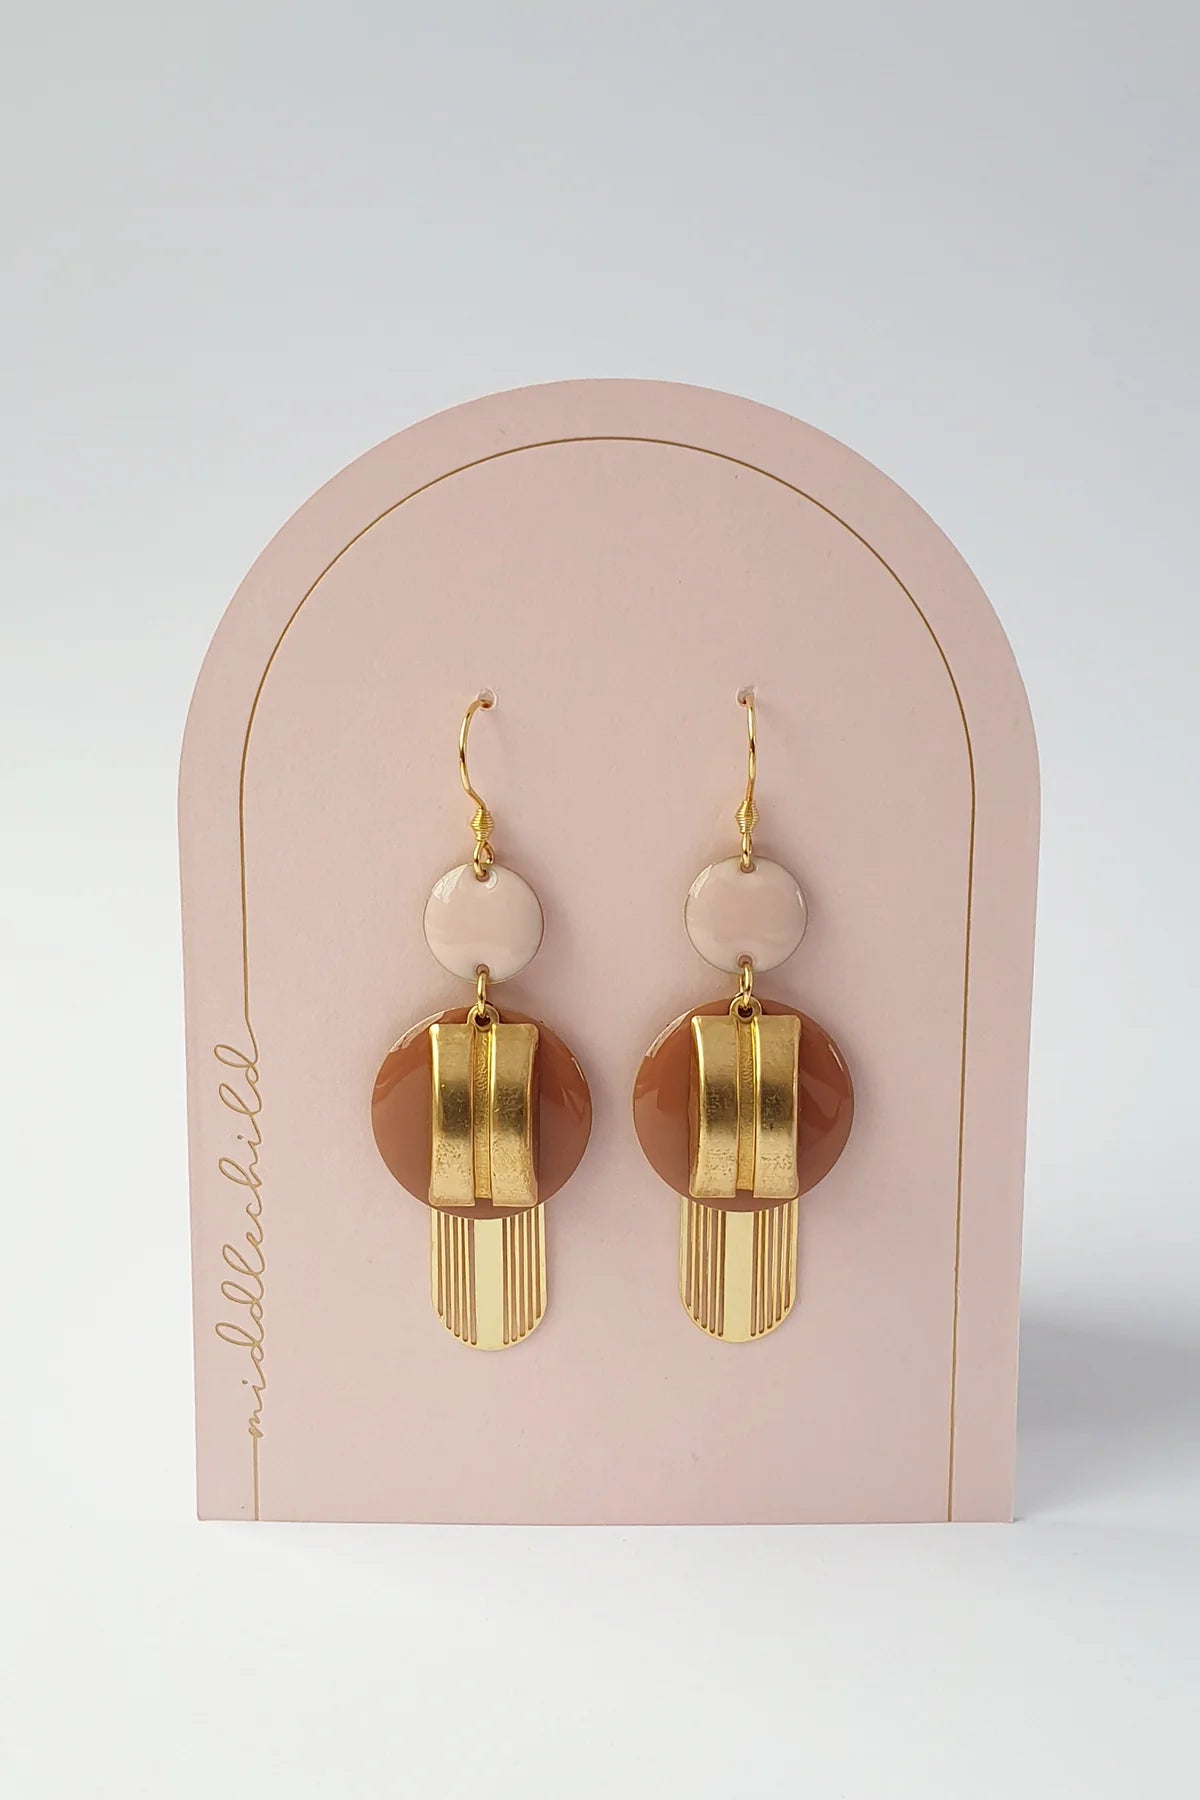 Middle Child - Ditto Earrings